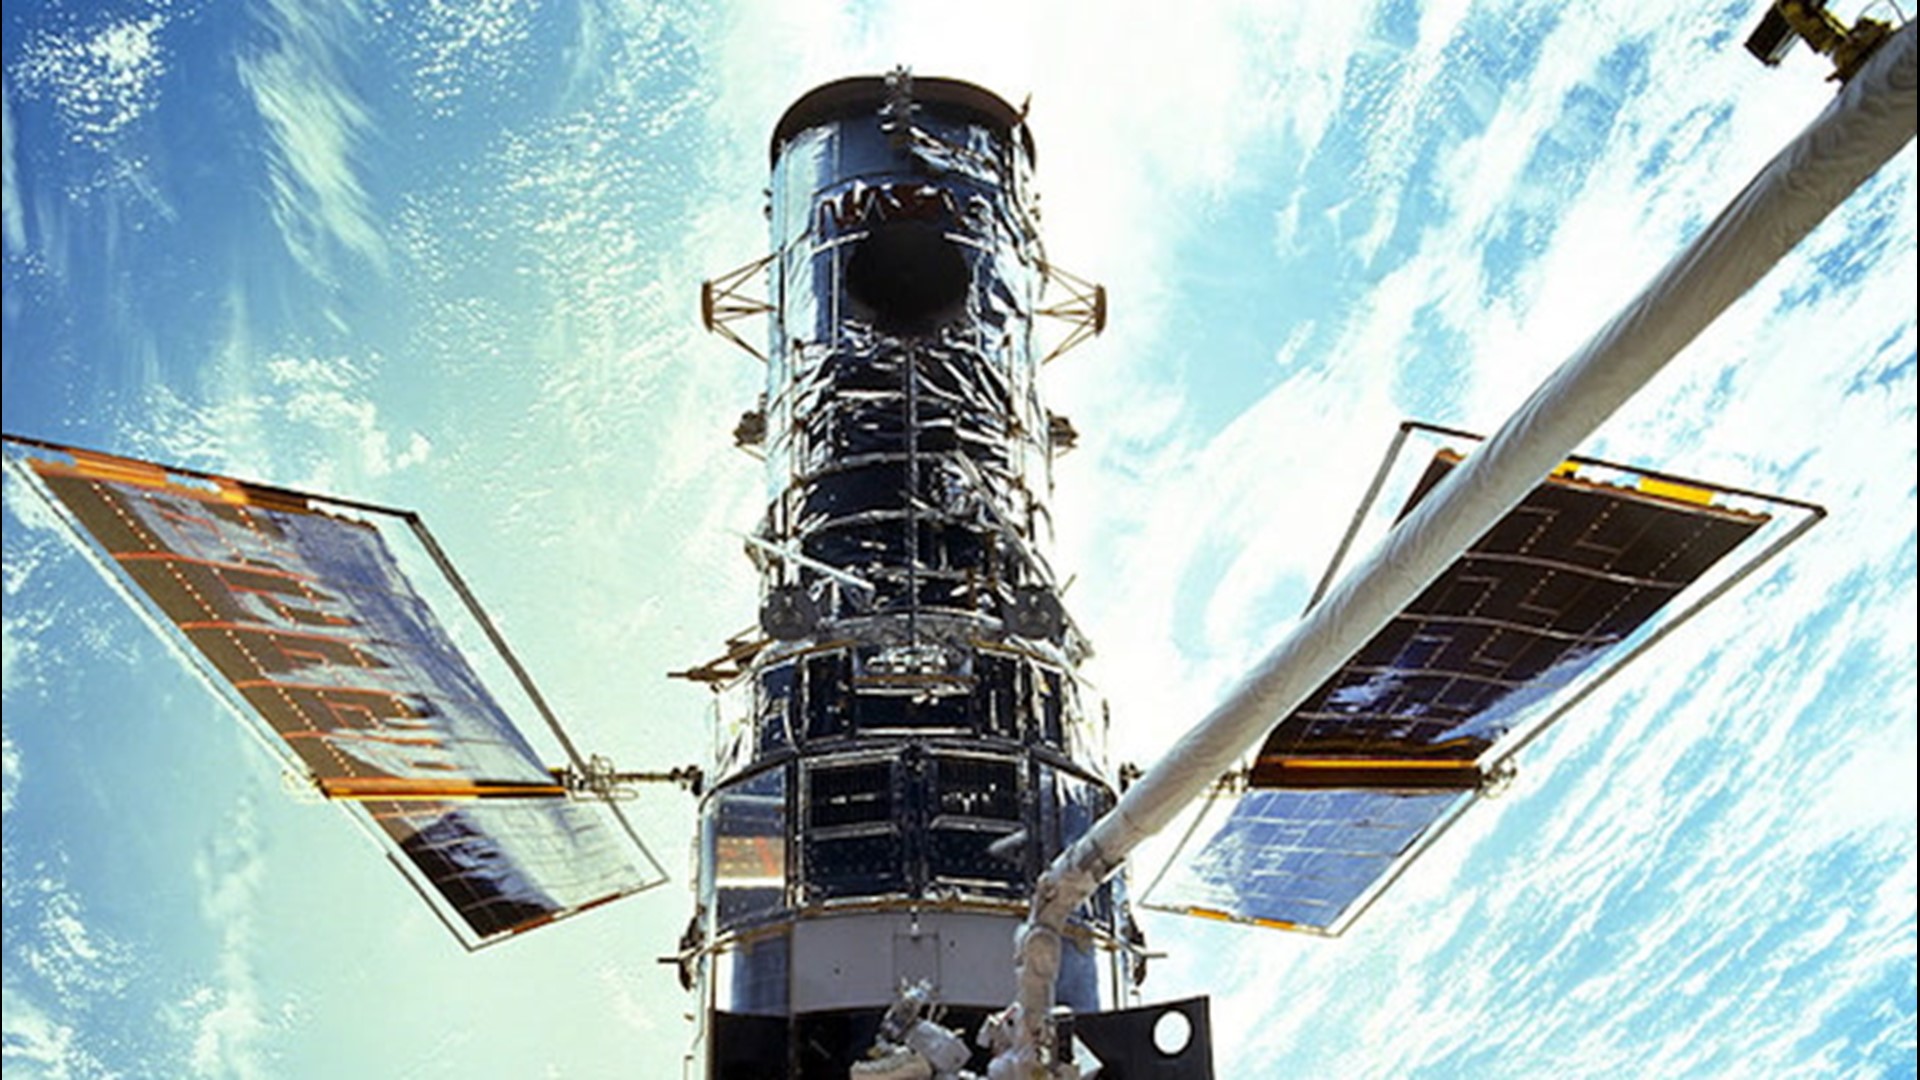 April 24 marks the 30th anniversary of the Hubble Space Telescope, which was pivotal in discoveries that helped build our understanding of the universe.